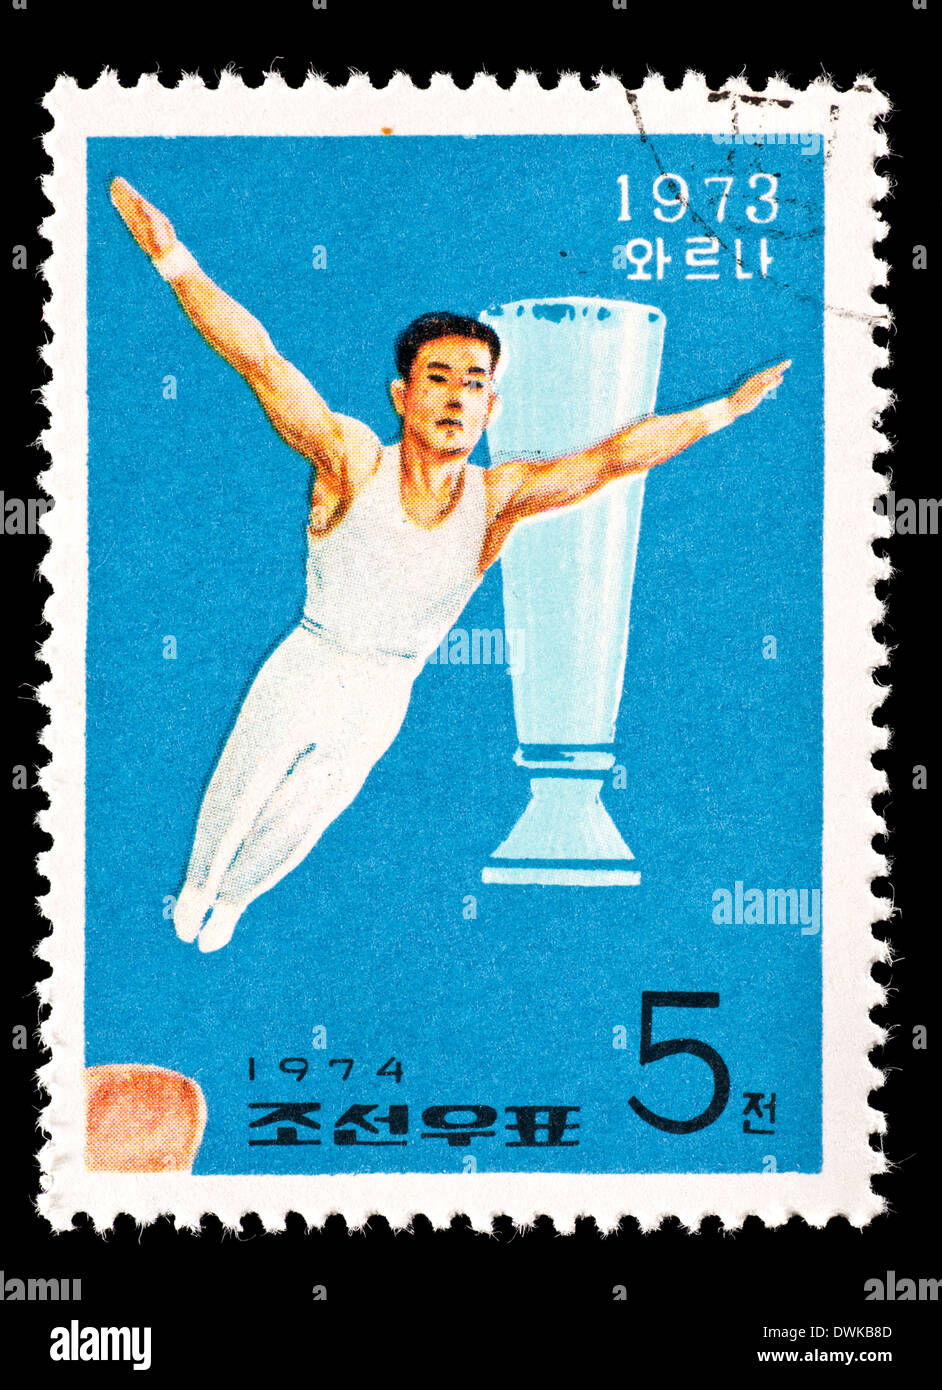 Postage stamp from North Korea depicting a ,ale gymnast. Stock Photo